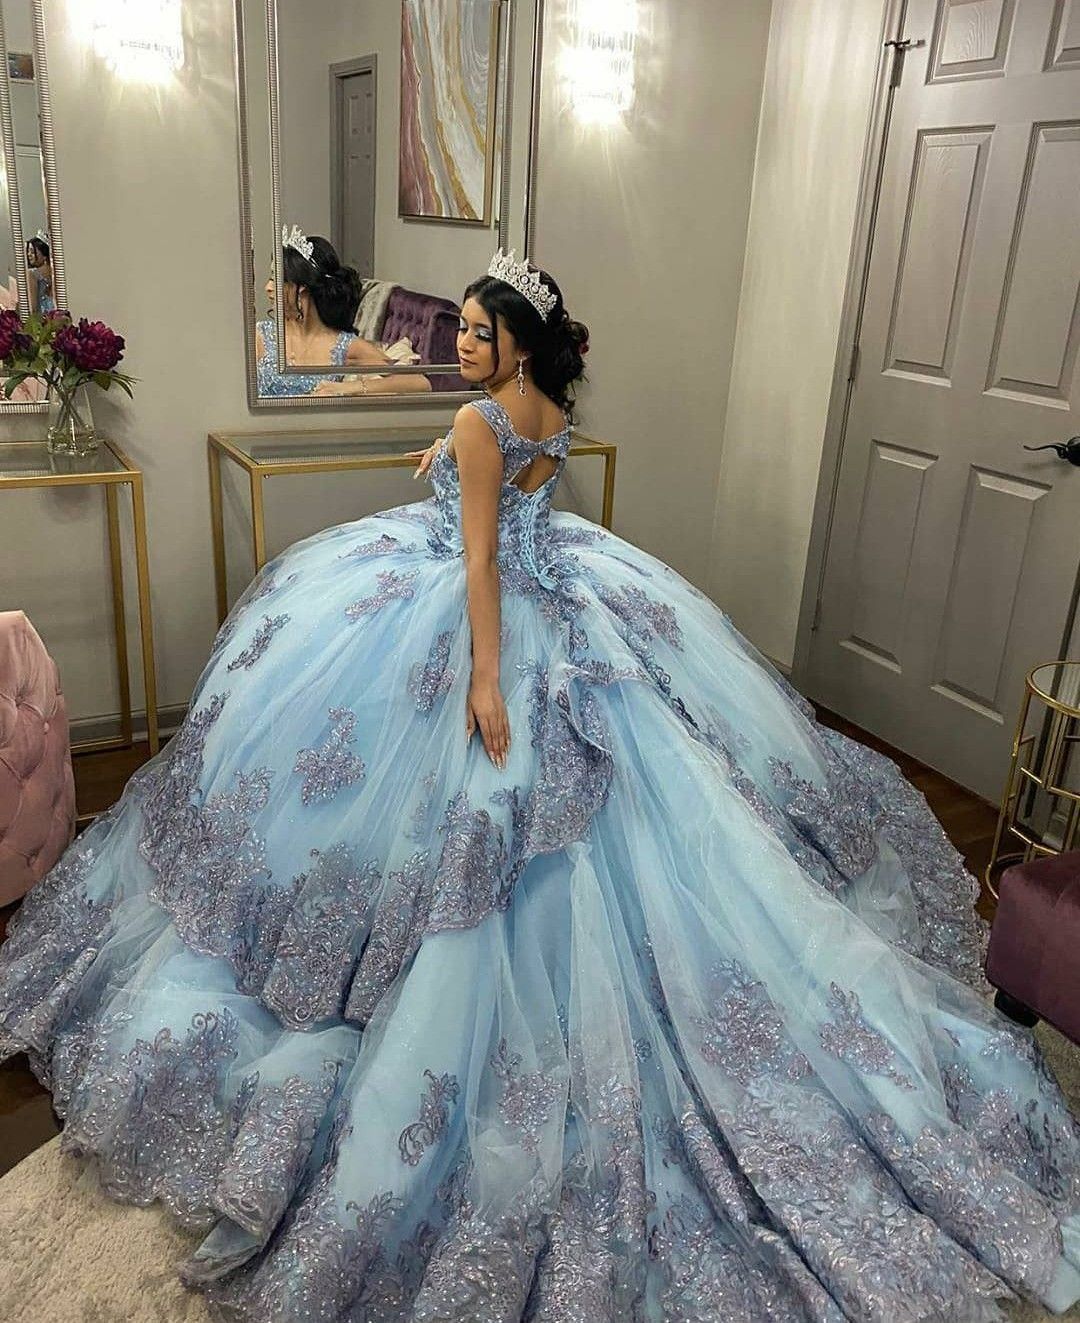 Applique Lace Decorated Bahama Blue Quinceanera Dress With Keyhole Back - Click Image to Close